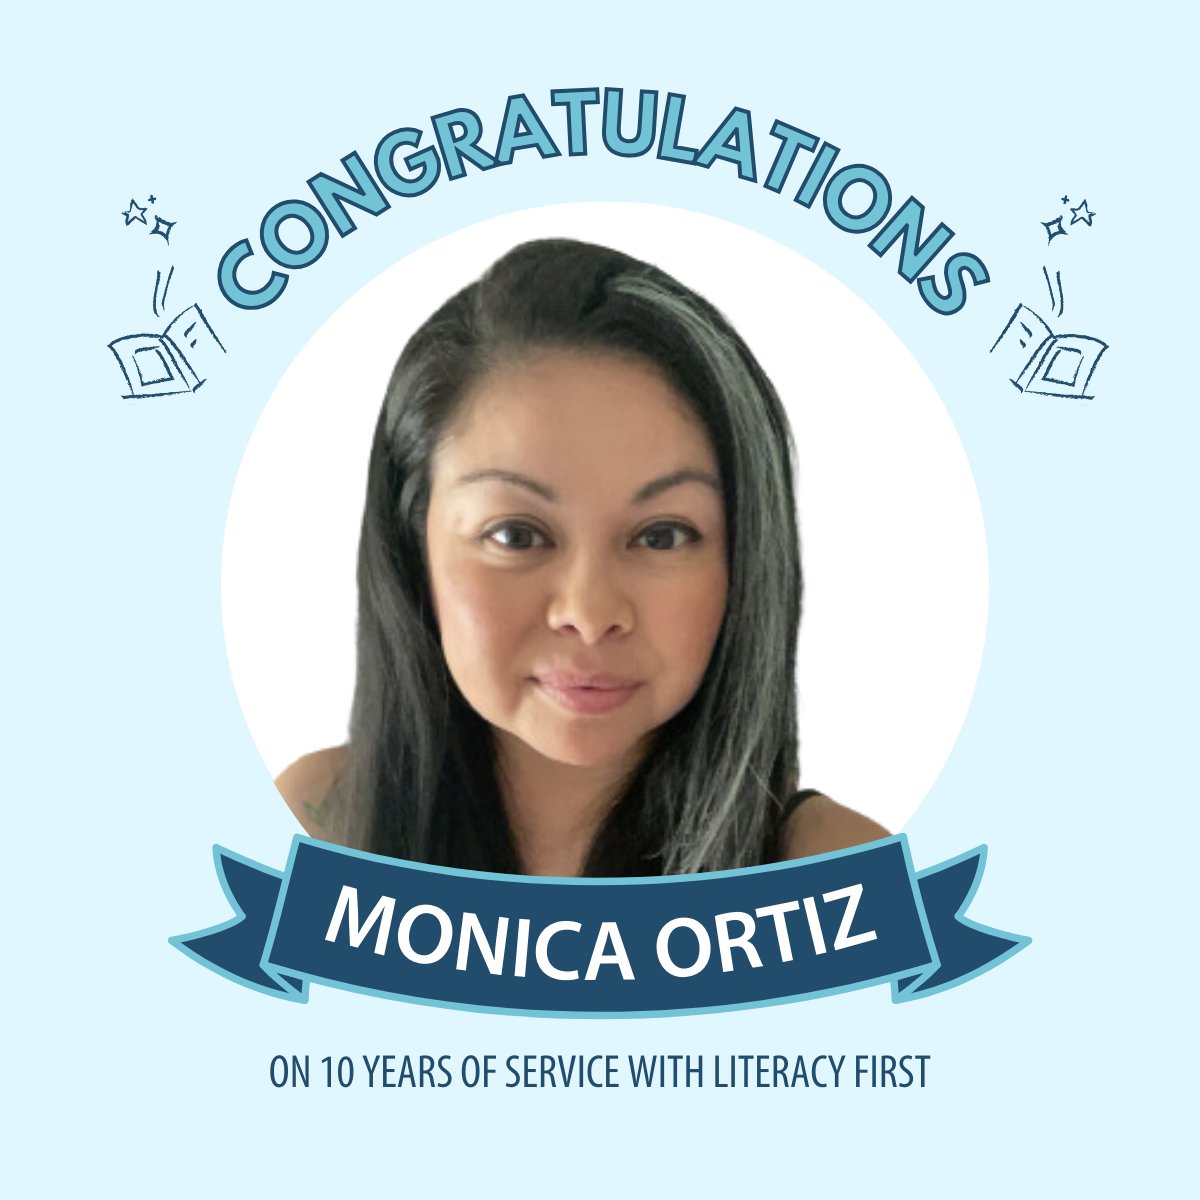 Congrats to Monica Ortiz, AmeriCorps Coach Manager, on 10 years of service! Mon brings organization, empathy, and patience to every project or challenge she faces. She is a positive support system for teammates and tutors alike. #10YearWorkAnniversary #StaffAppreciation